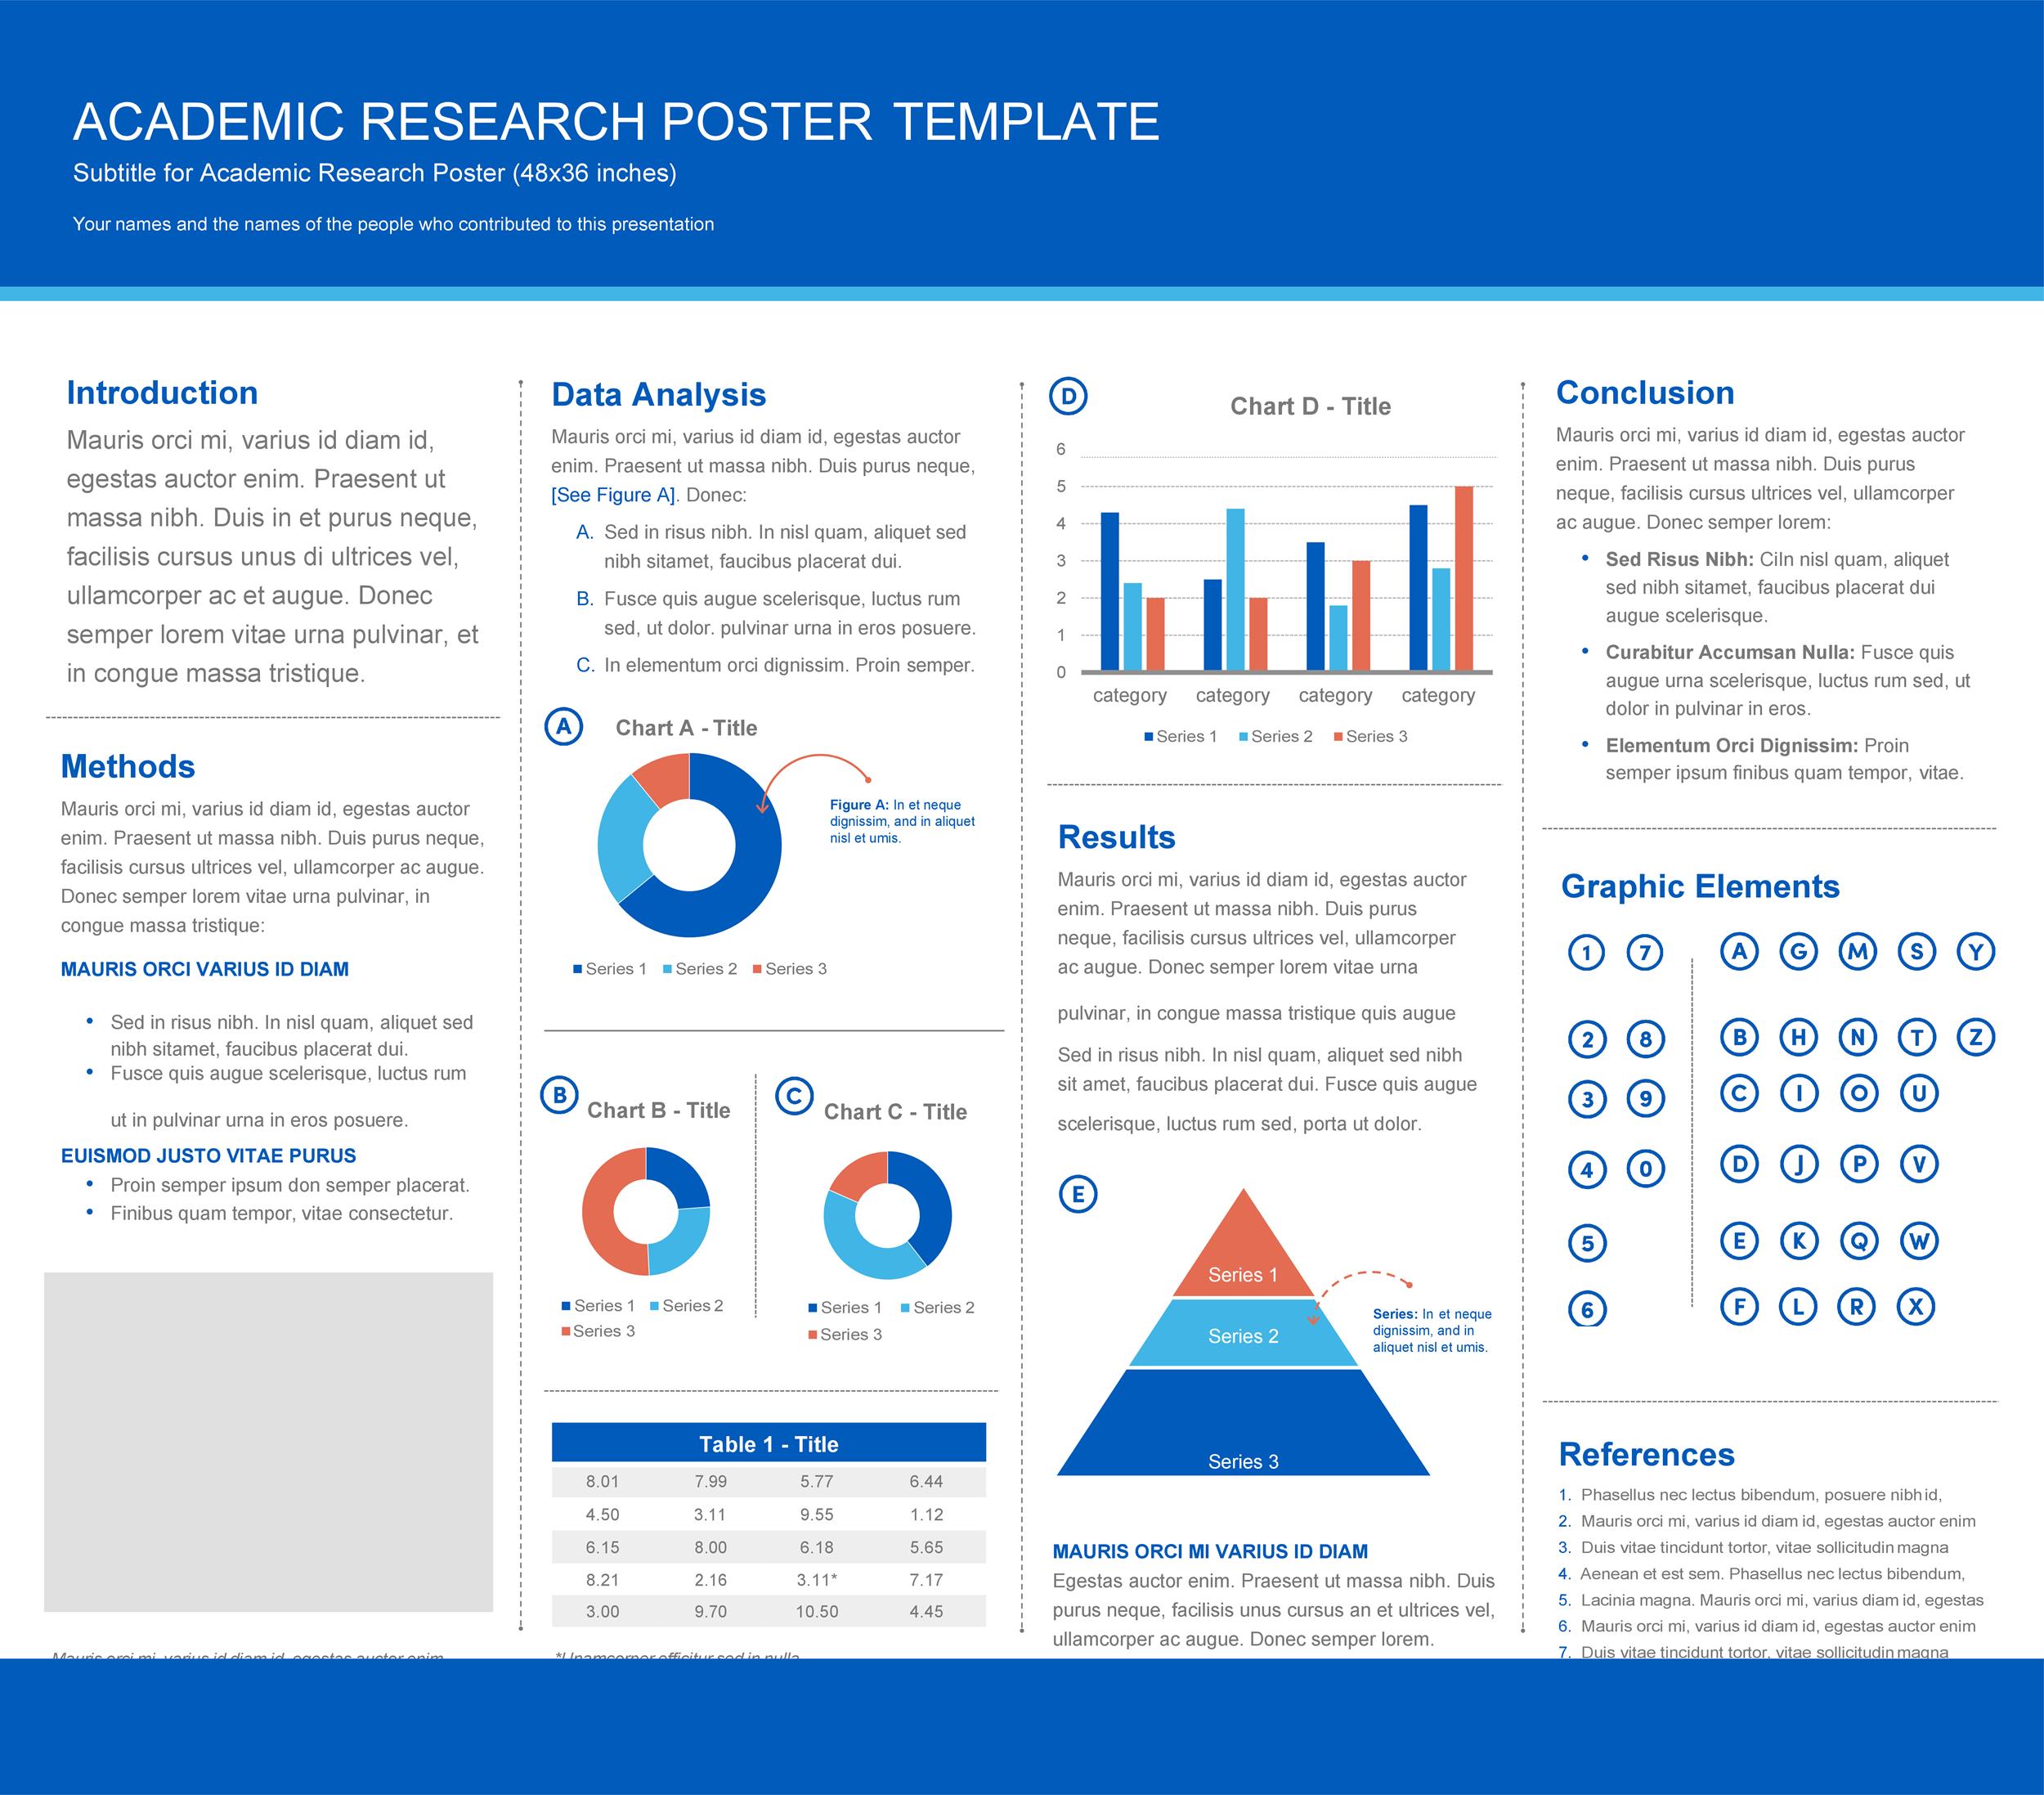 Academic Research Poster Template